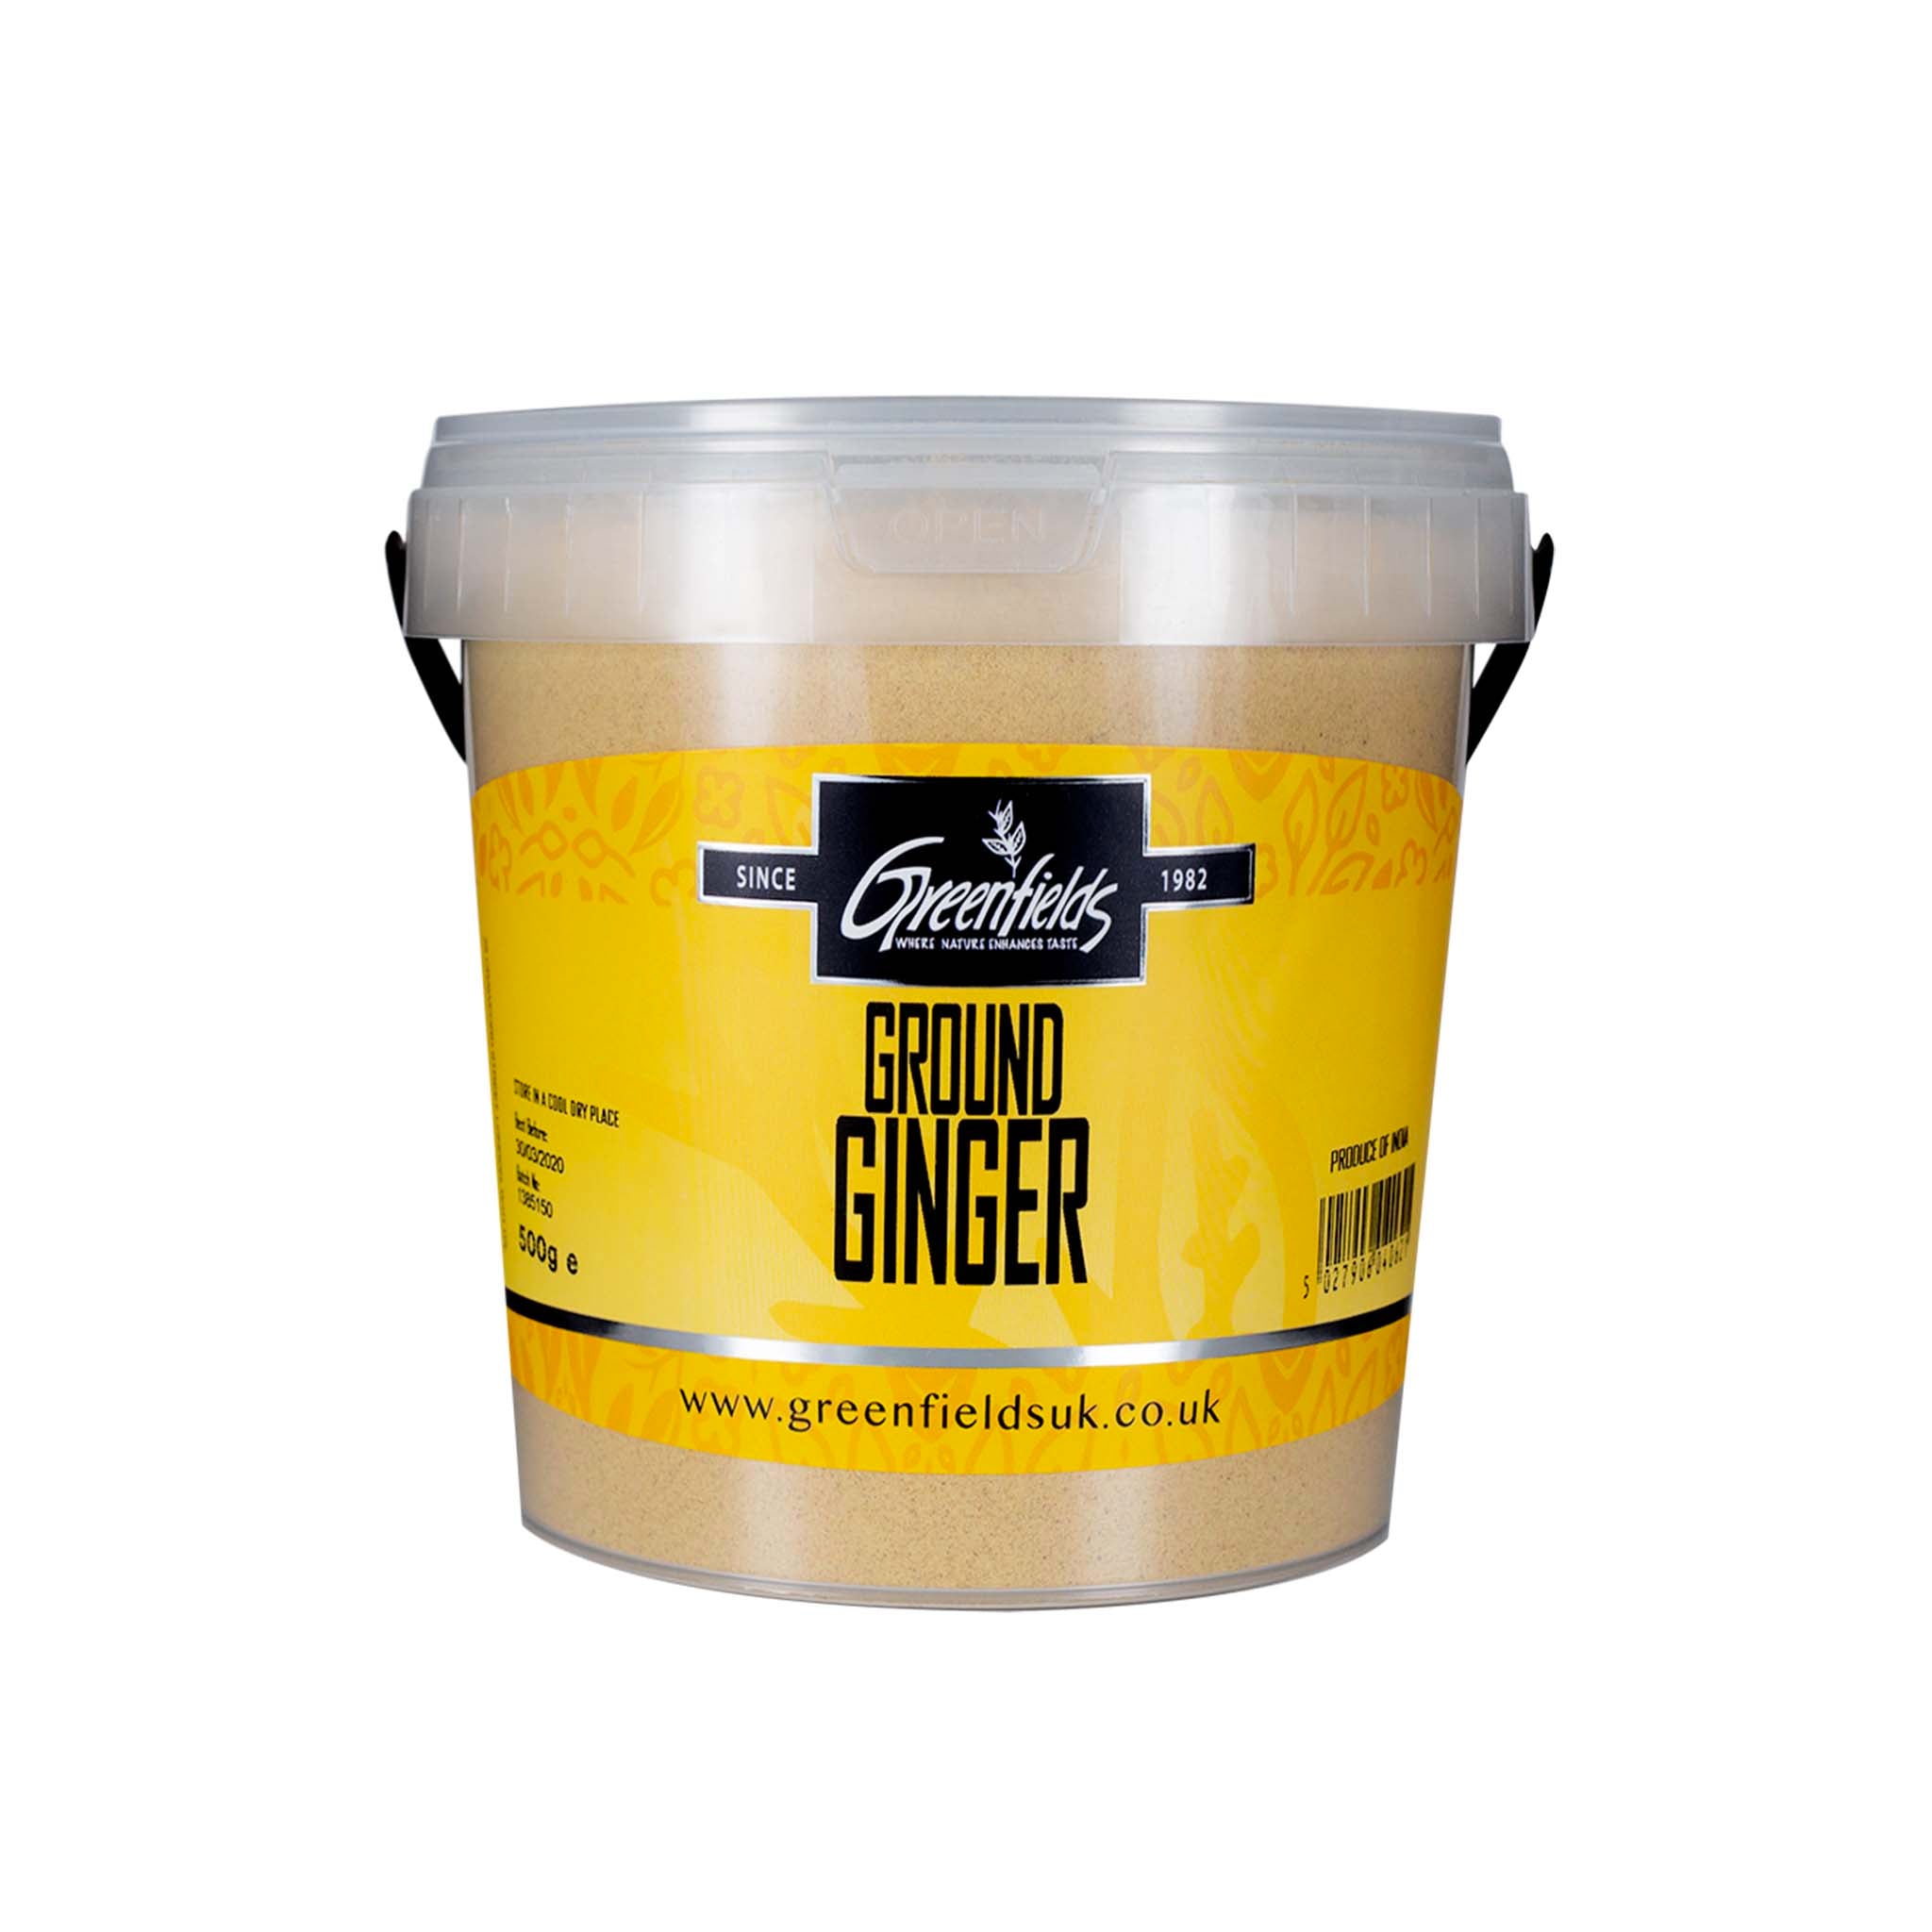 Greenfields Ground Ginger Catering Size Ingredients Herbs & Spices Catering Size Herbs & Spices